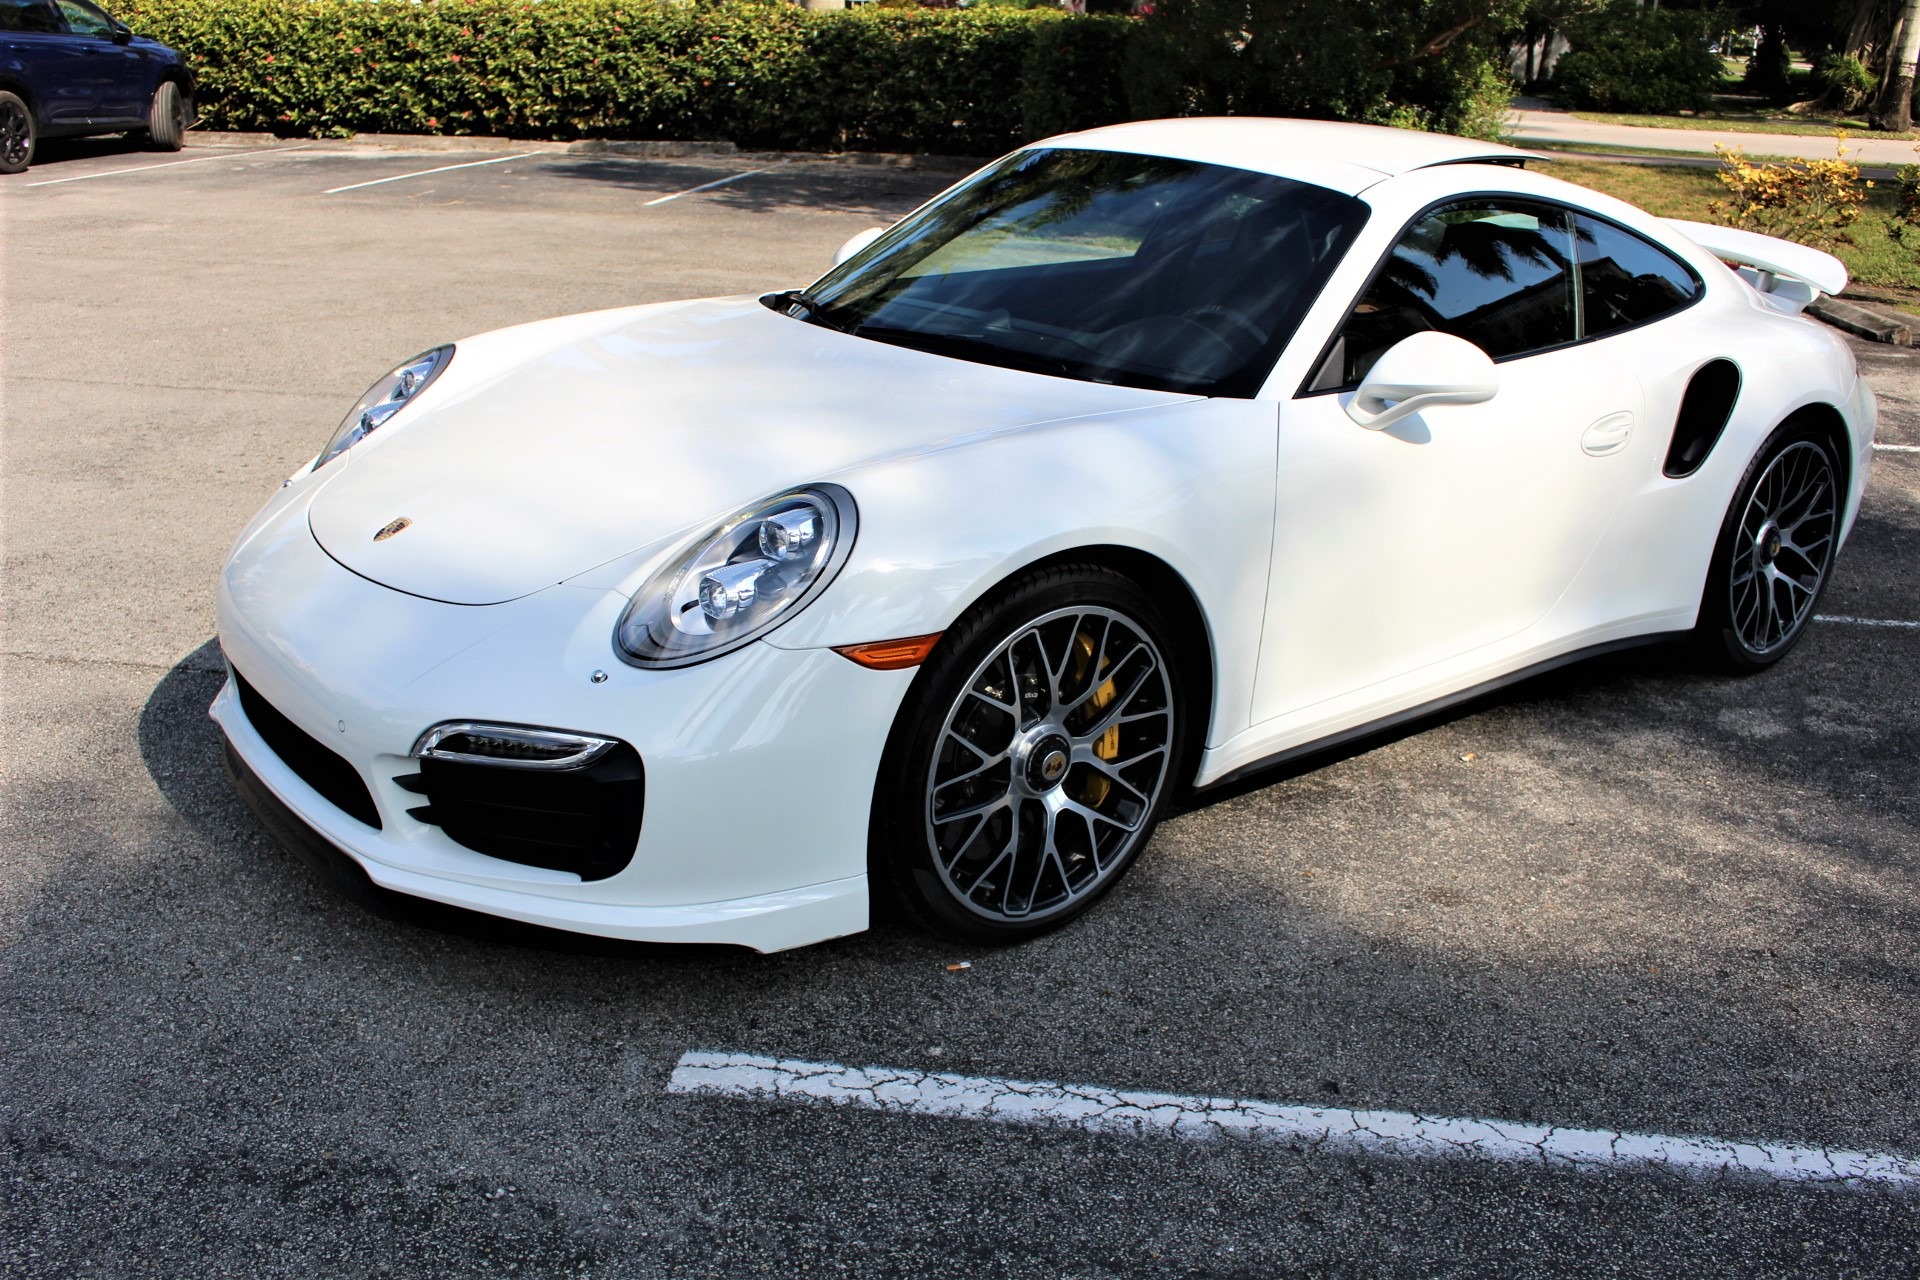 Used 2014 Porsche 911 Turbo S for sale Sold at The Gables Sports Cars in Miami FL 33146 3